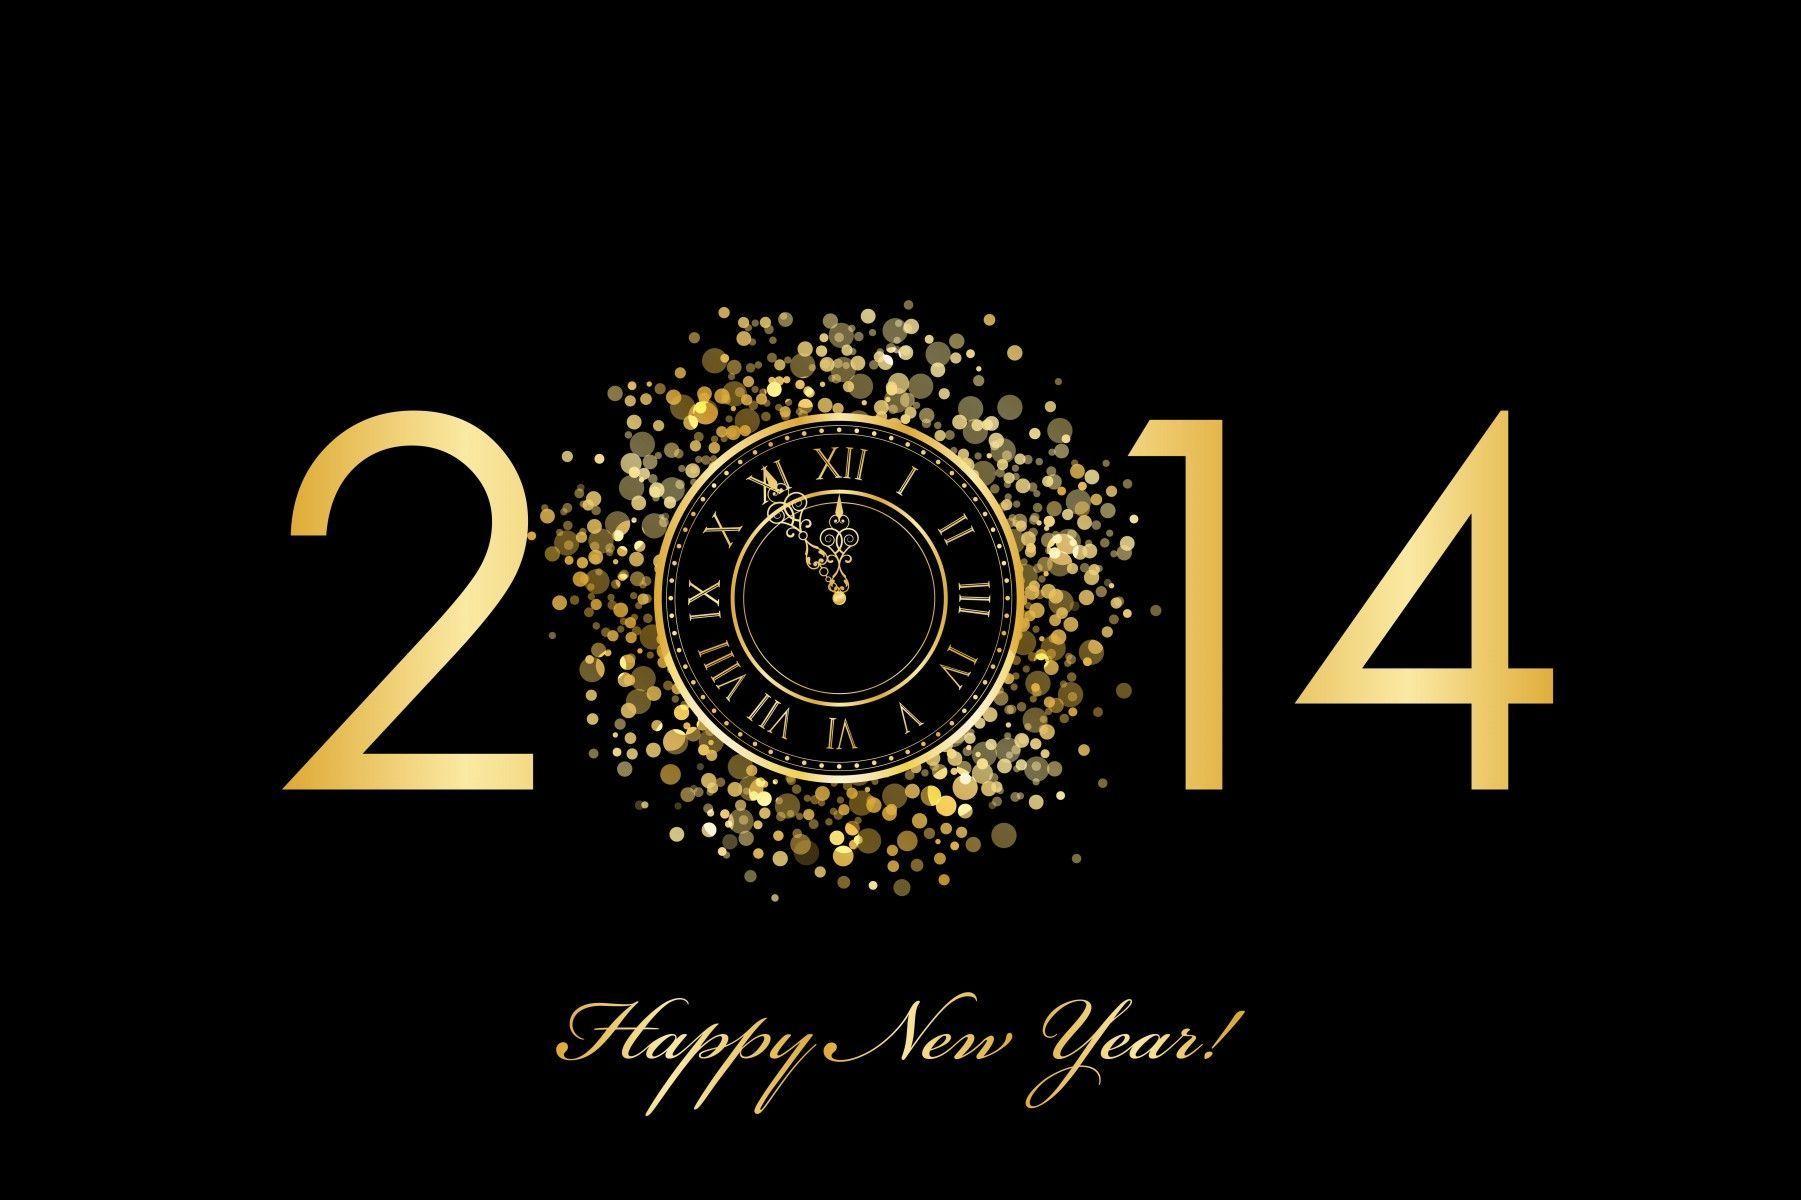 New Years Eve 2014 Wallpaper